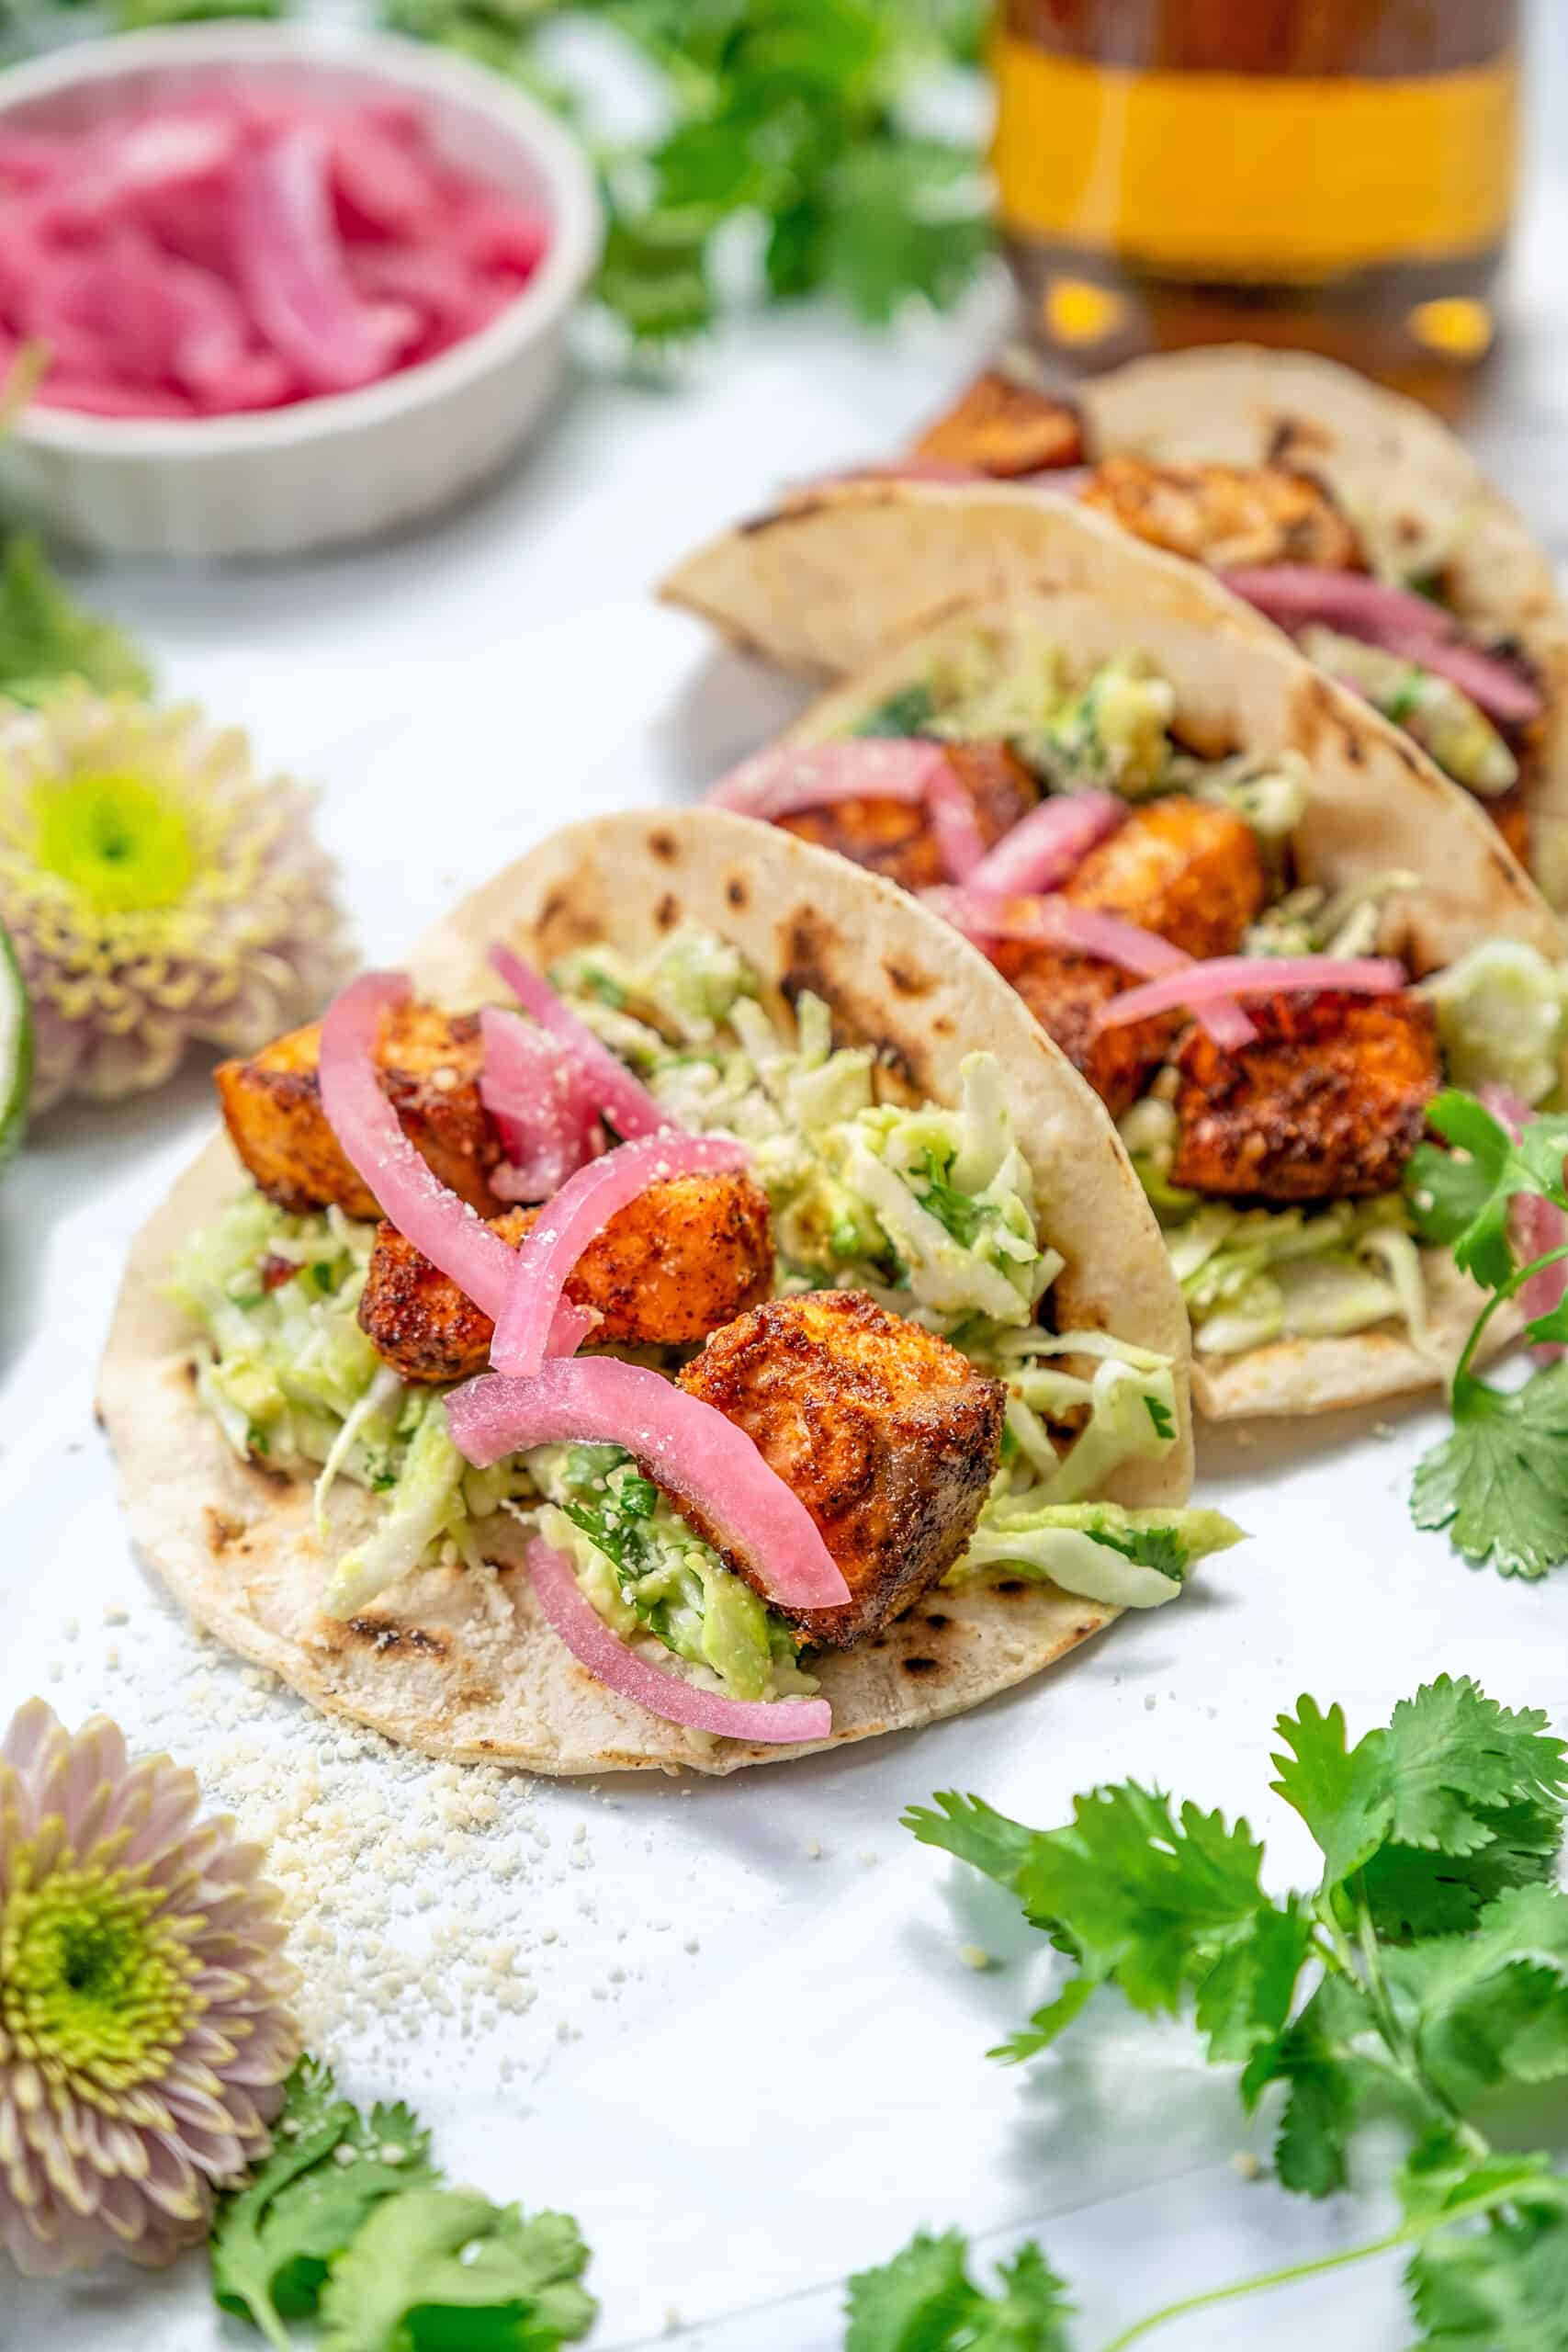 Salmon Tacos with Slaw: Creating Flavorful Seafood Tacos